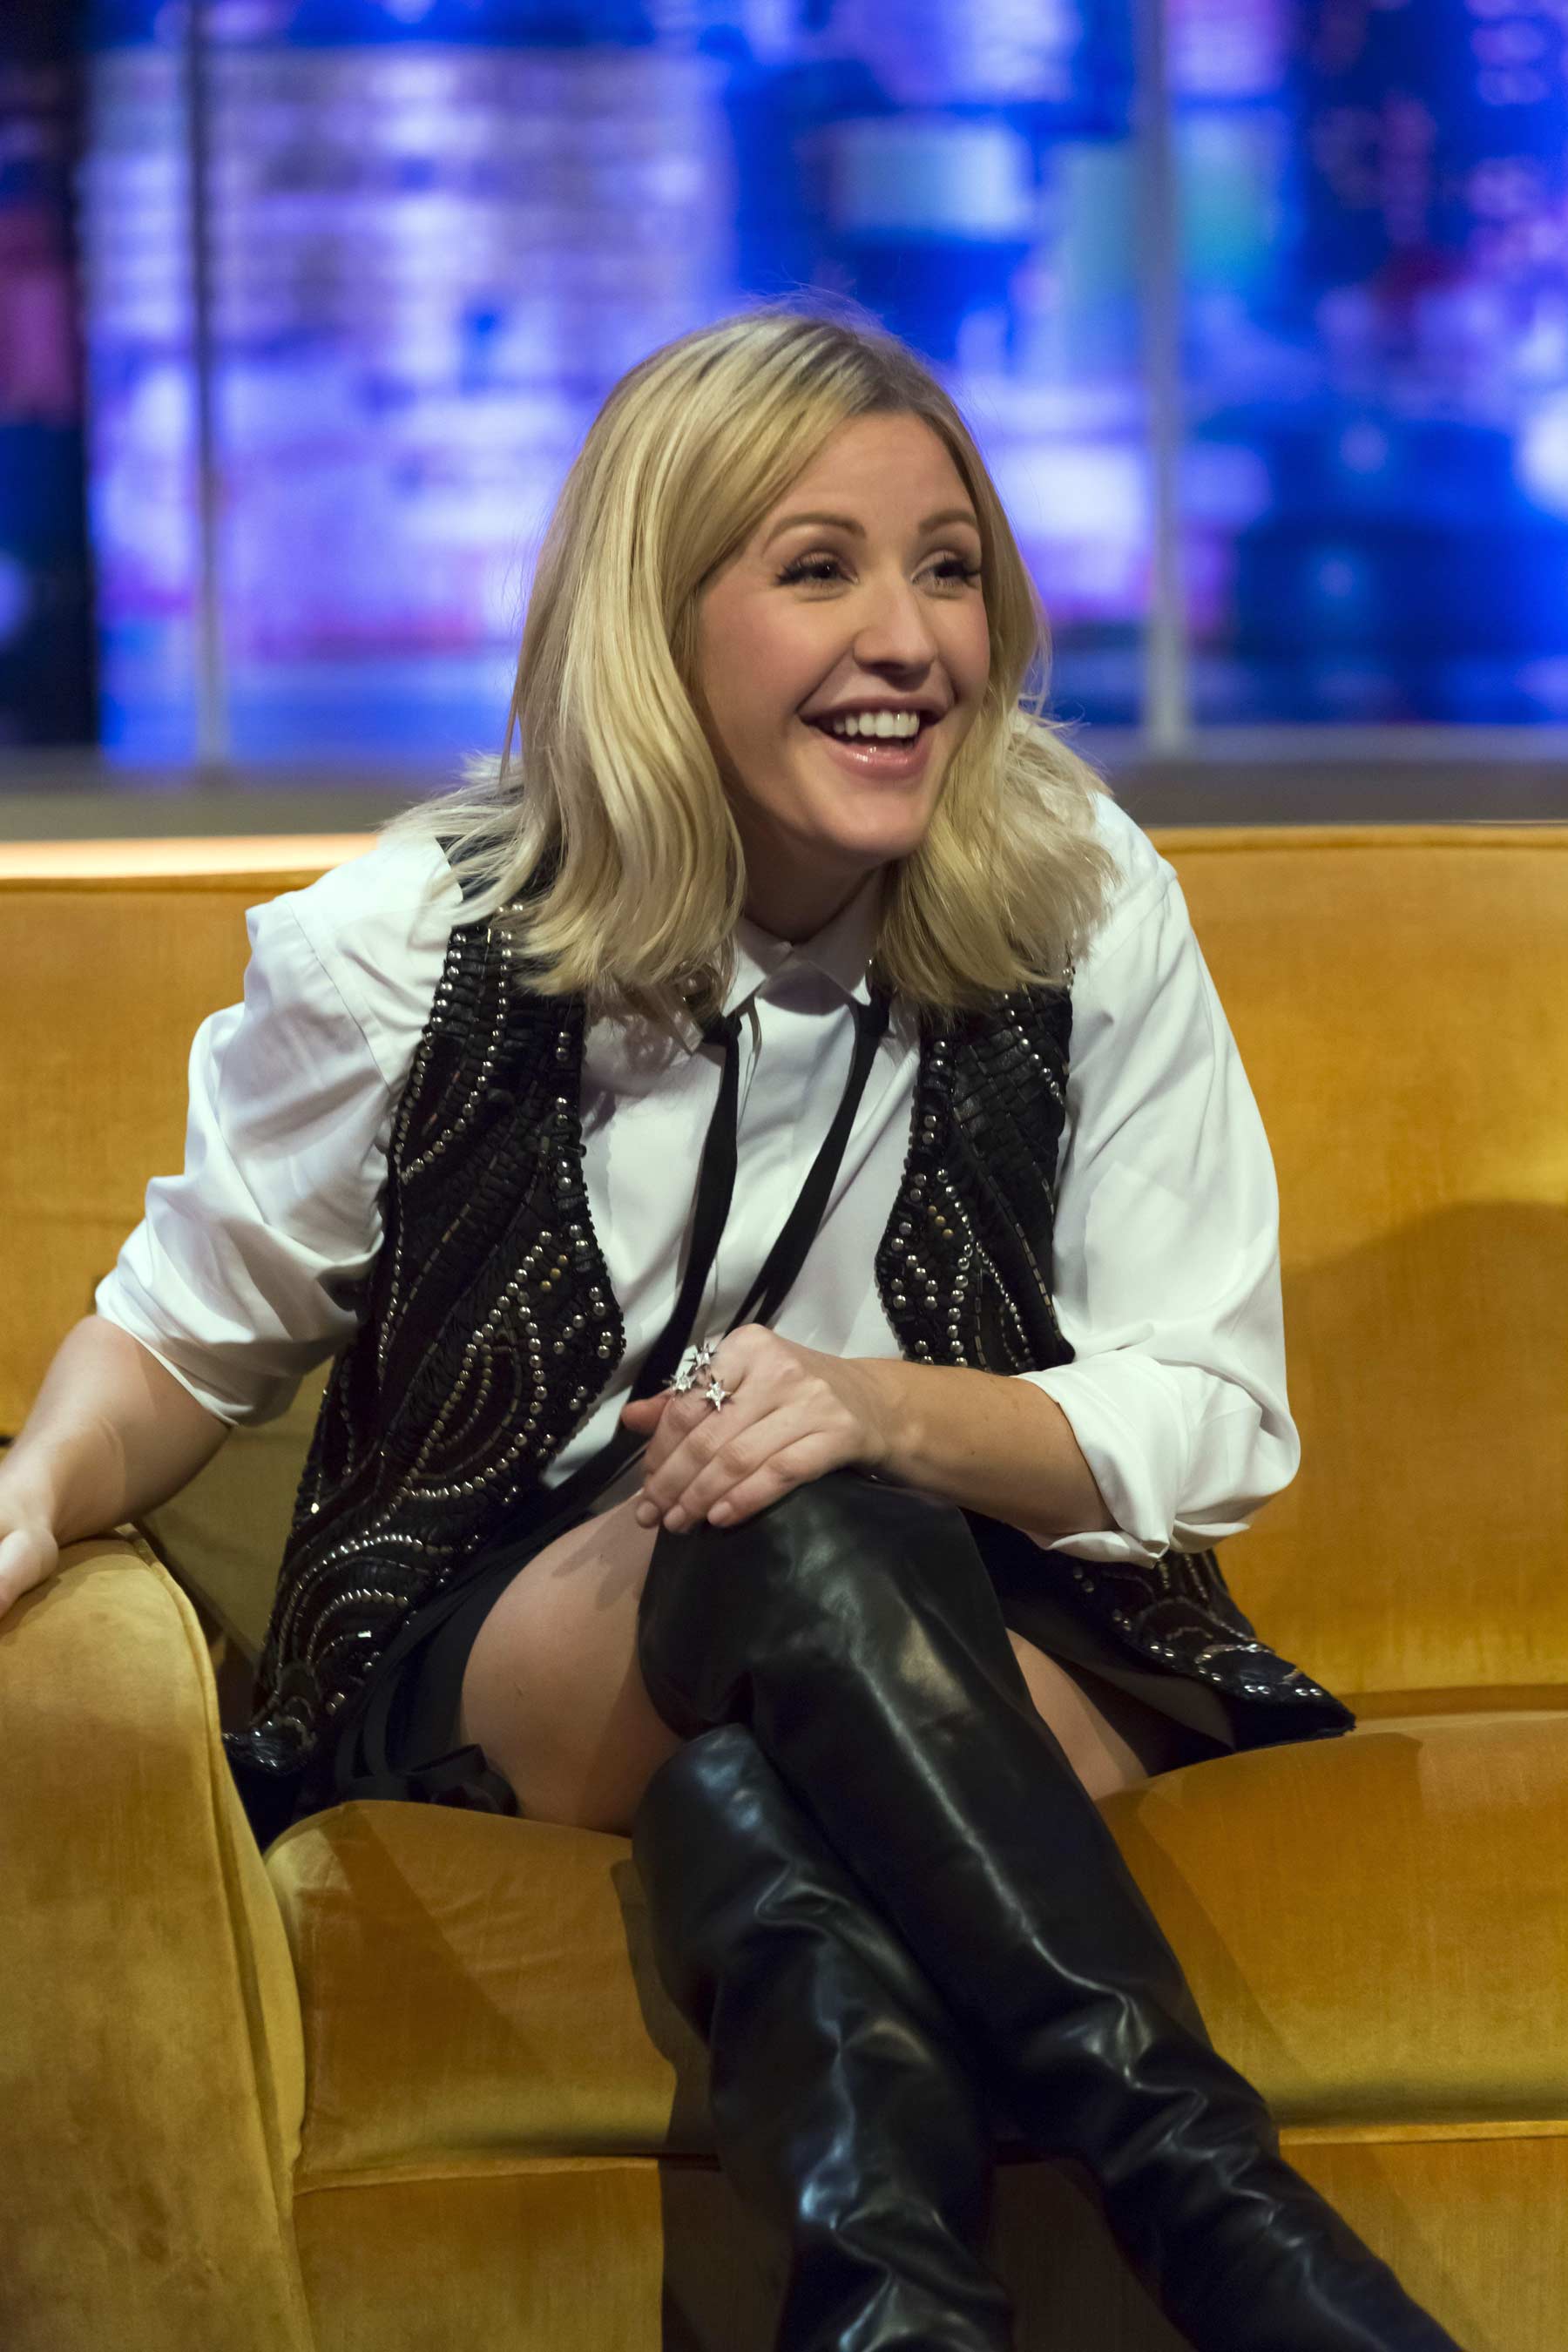 Ellie Goulding performs at The Jonathan Ross Show